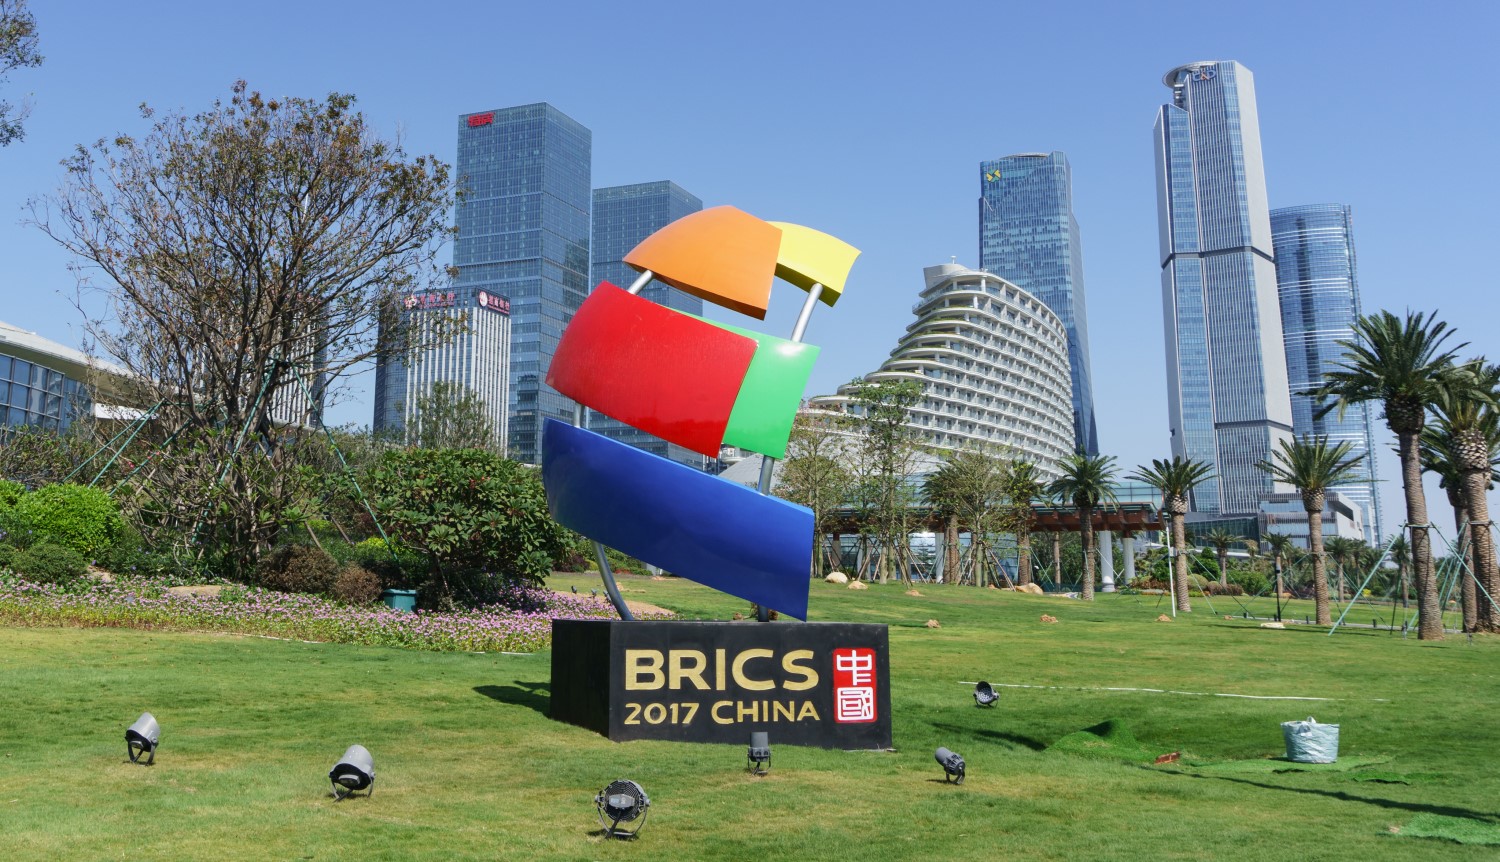 What Are the Technical Requirements for Using BRICS Tether?